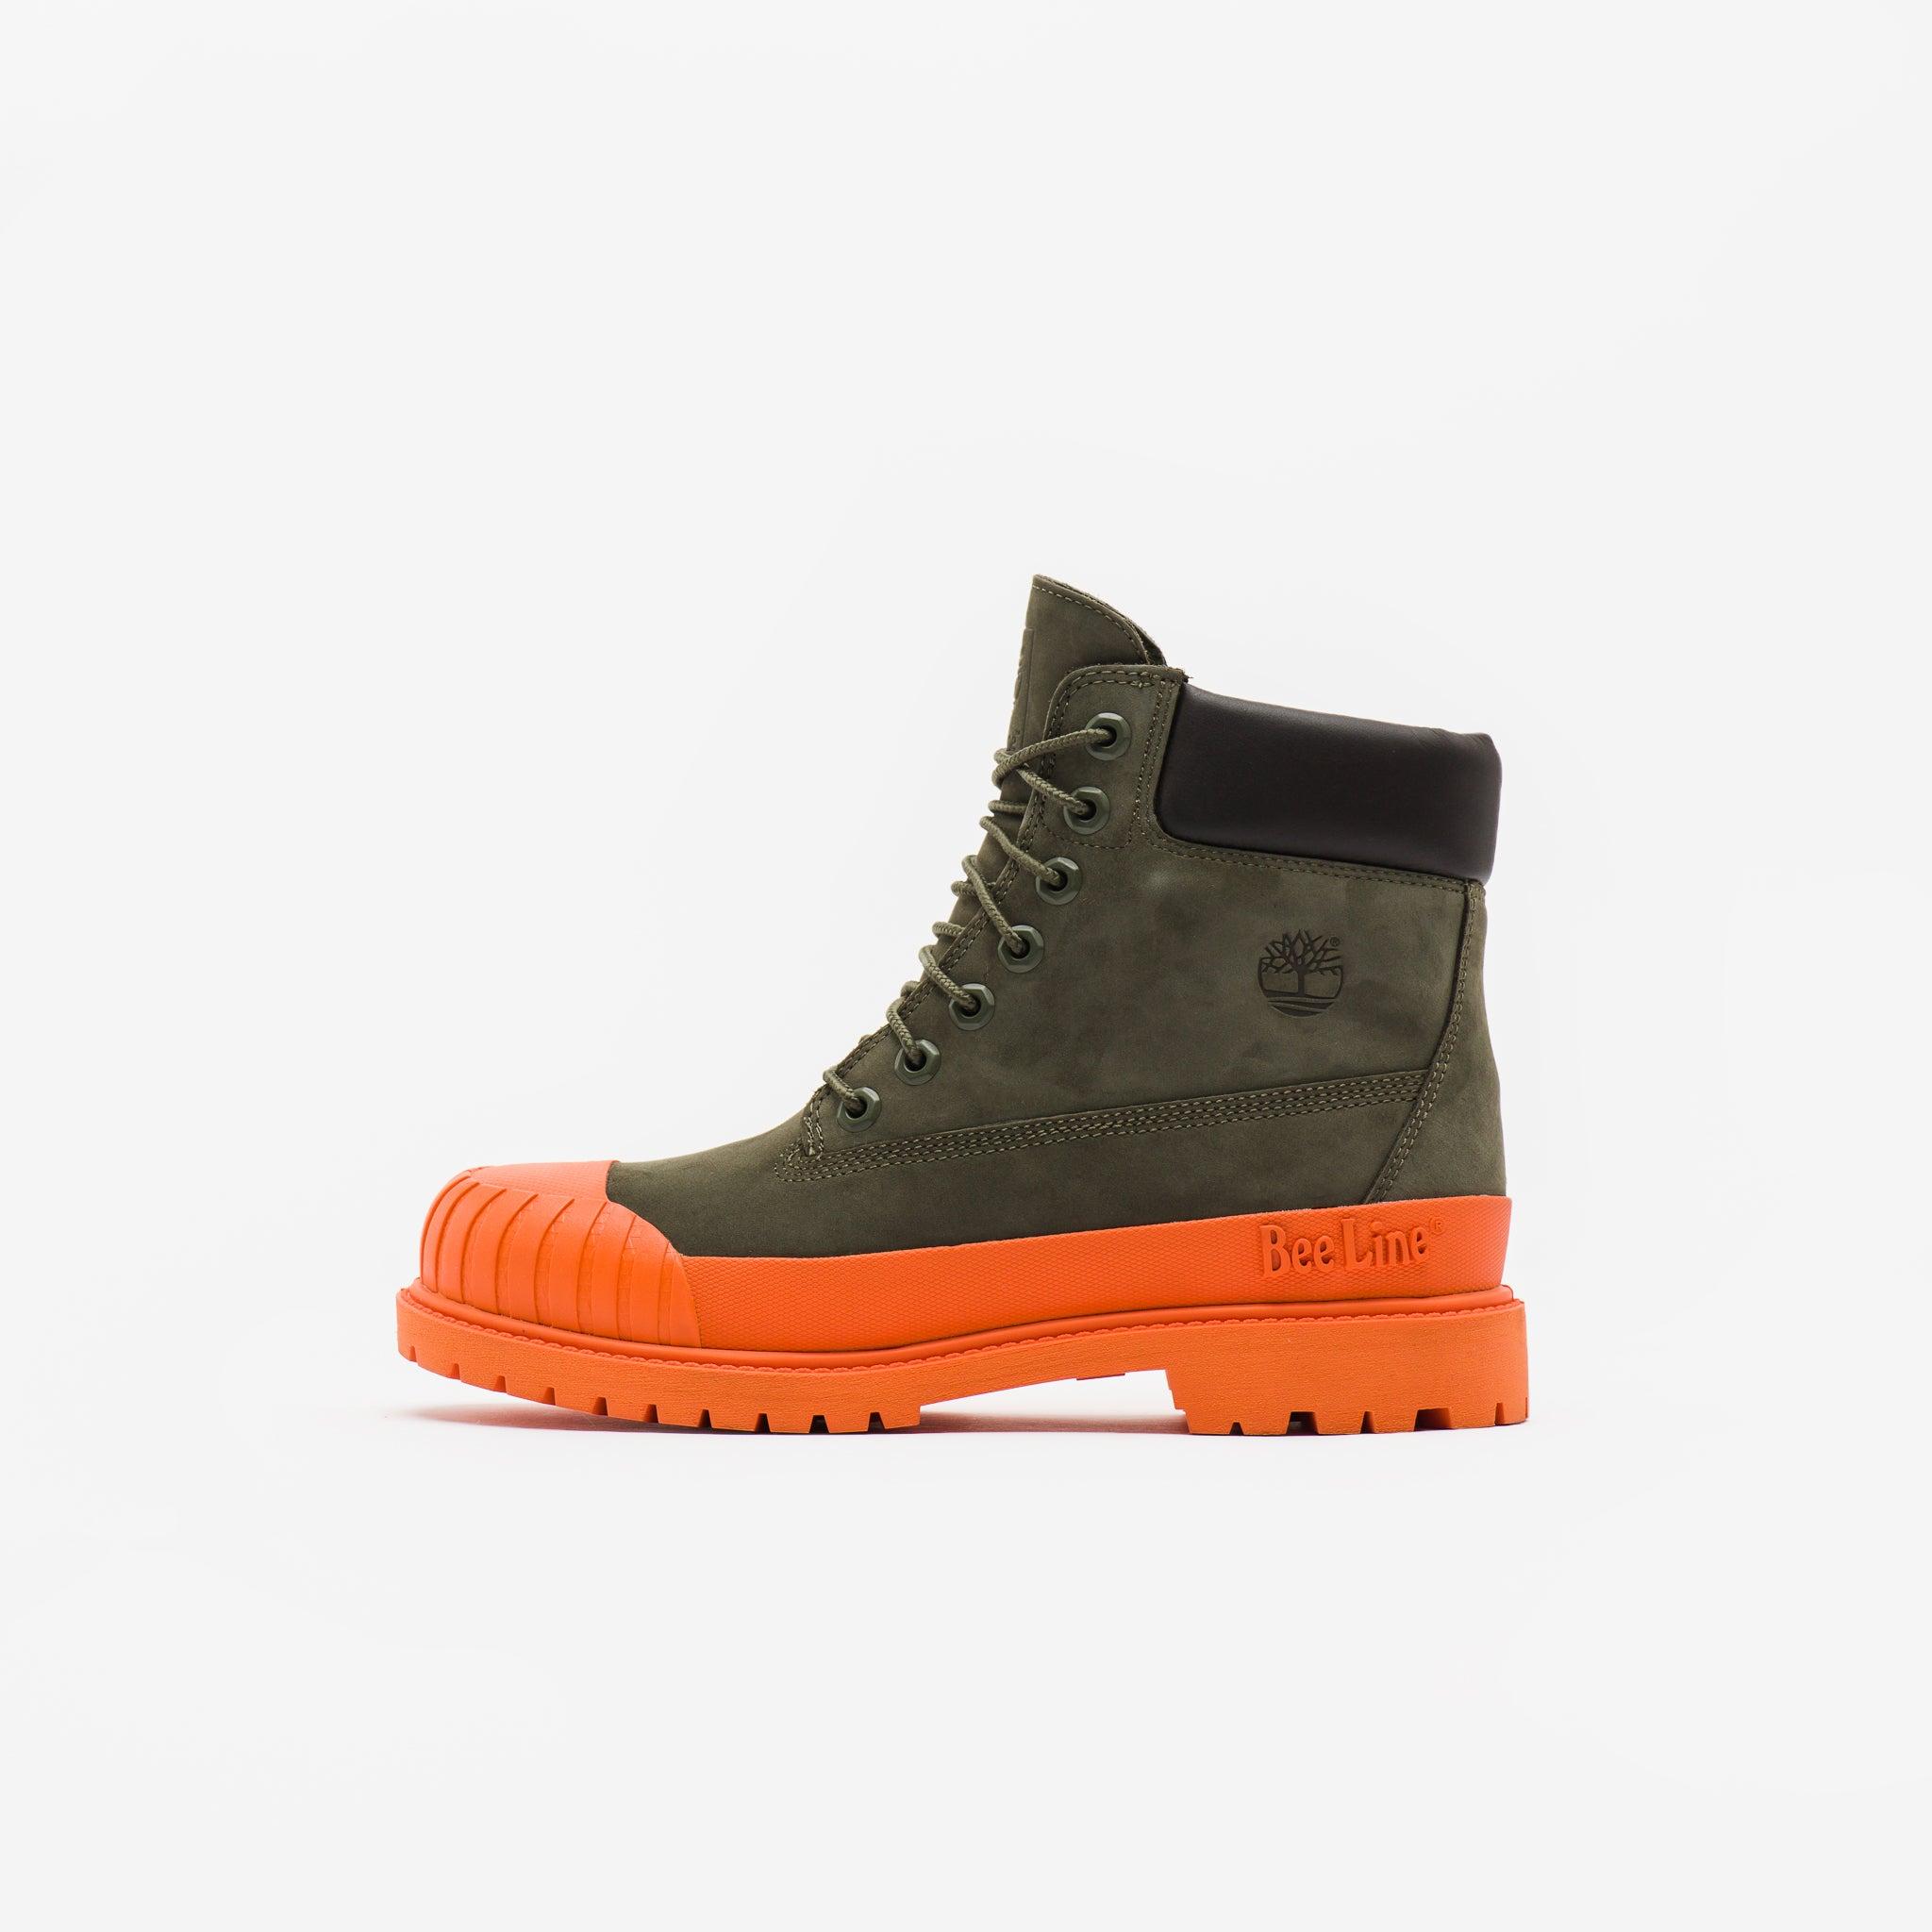 Timberland Bee Line Womens 6 Inch Rubber Toe Boots in Green | Lyst